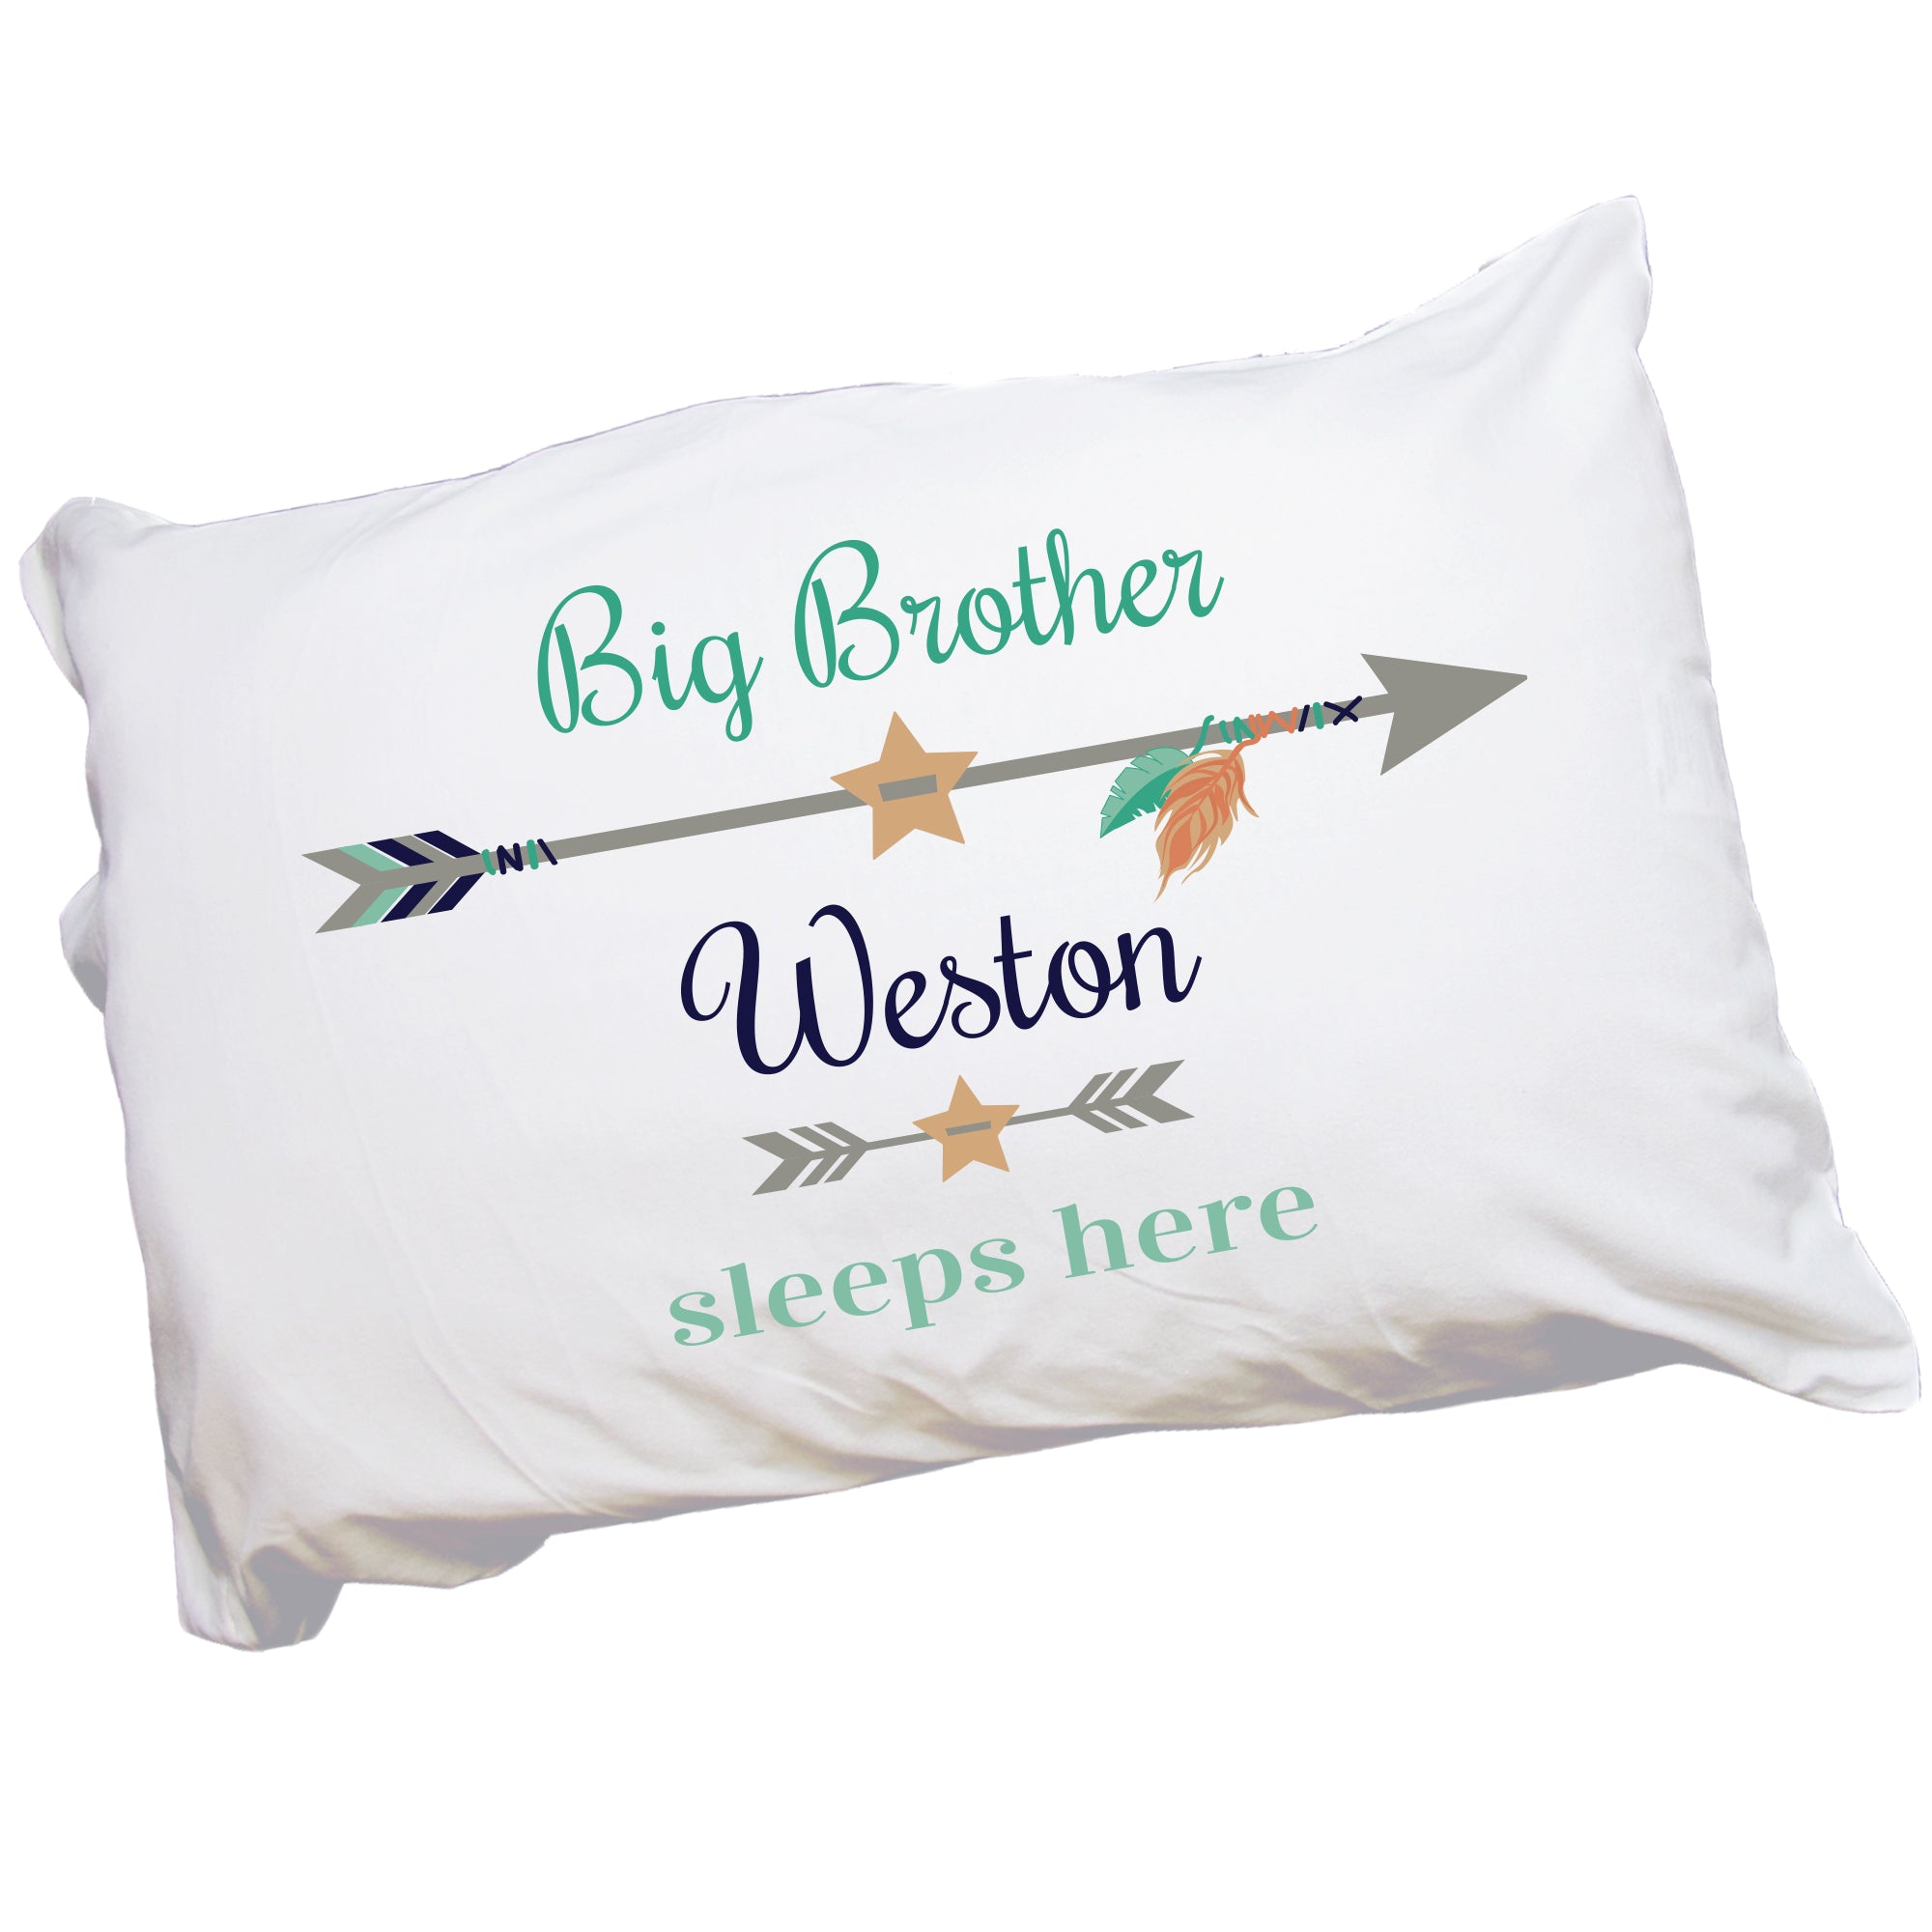 Personalized Big Brother pillowcase gift